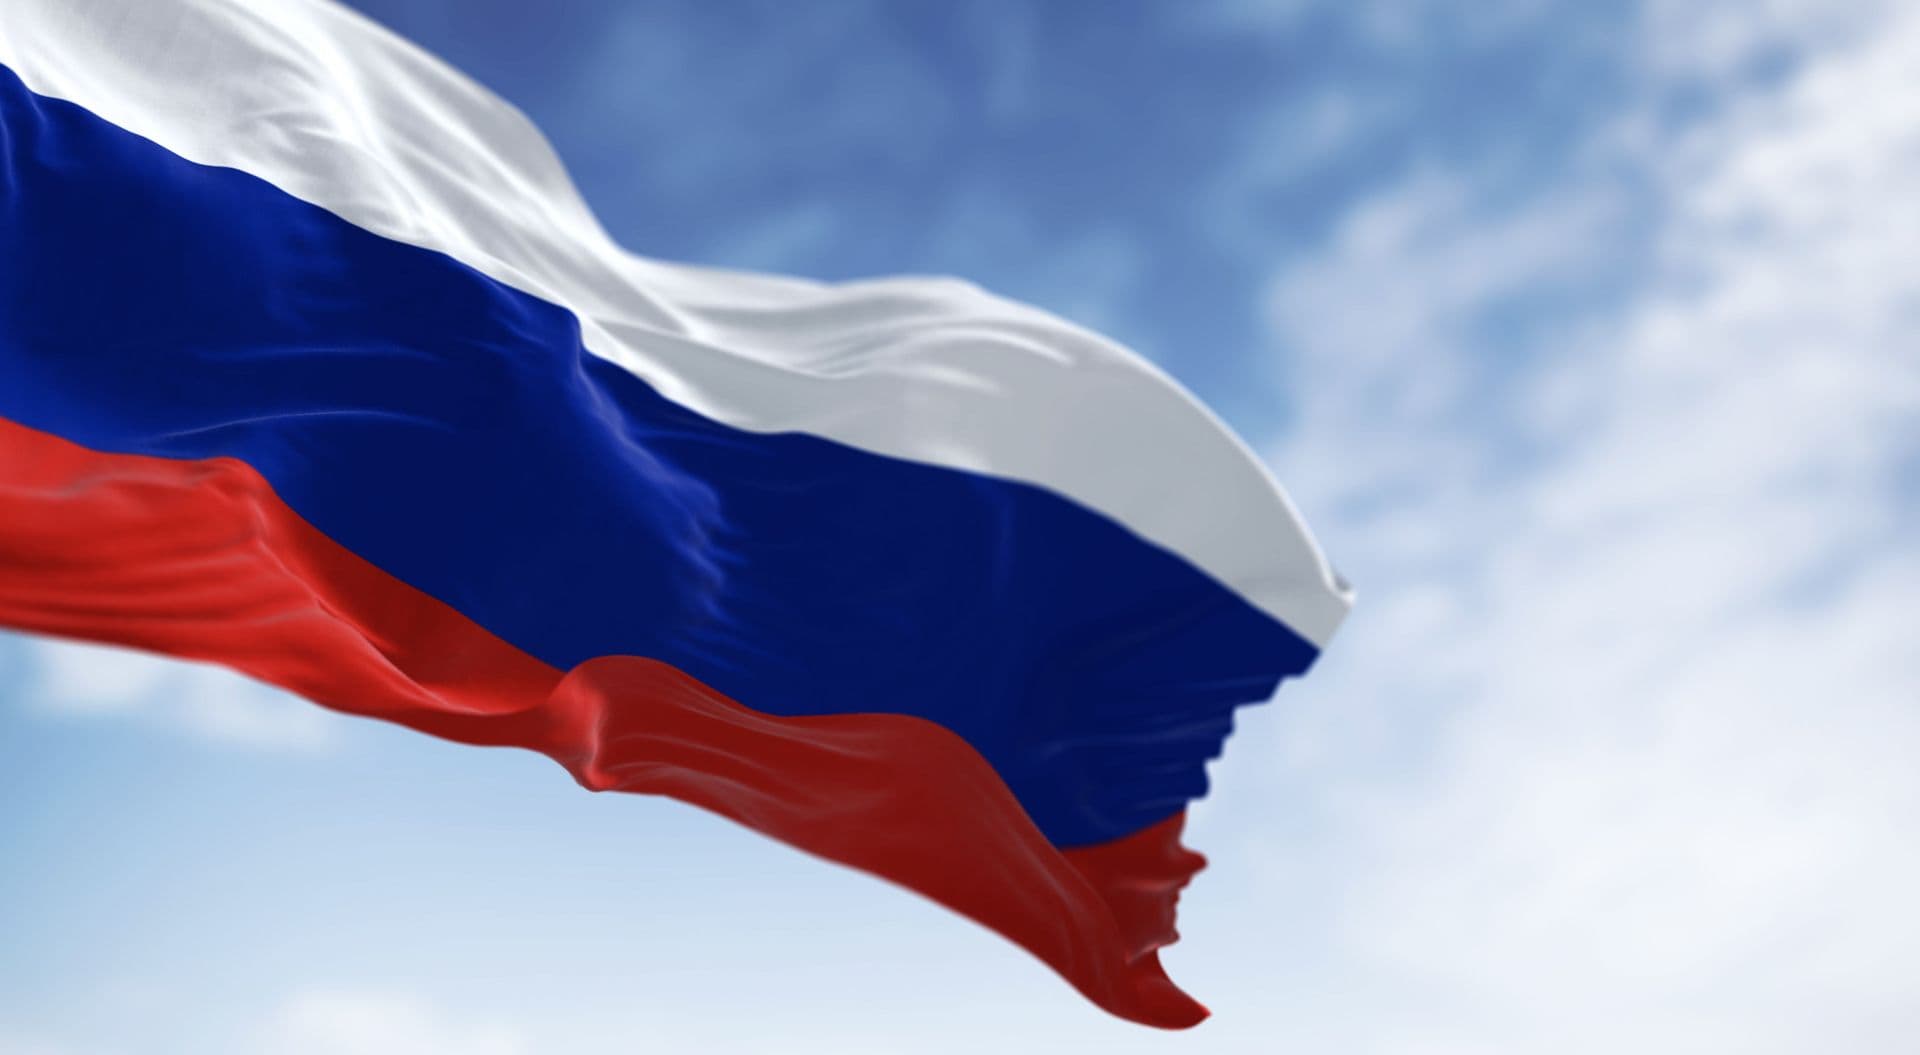 Three National Flags Of Russia Waving In The Wind On A Clear Day